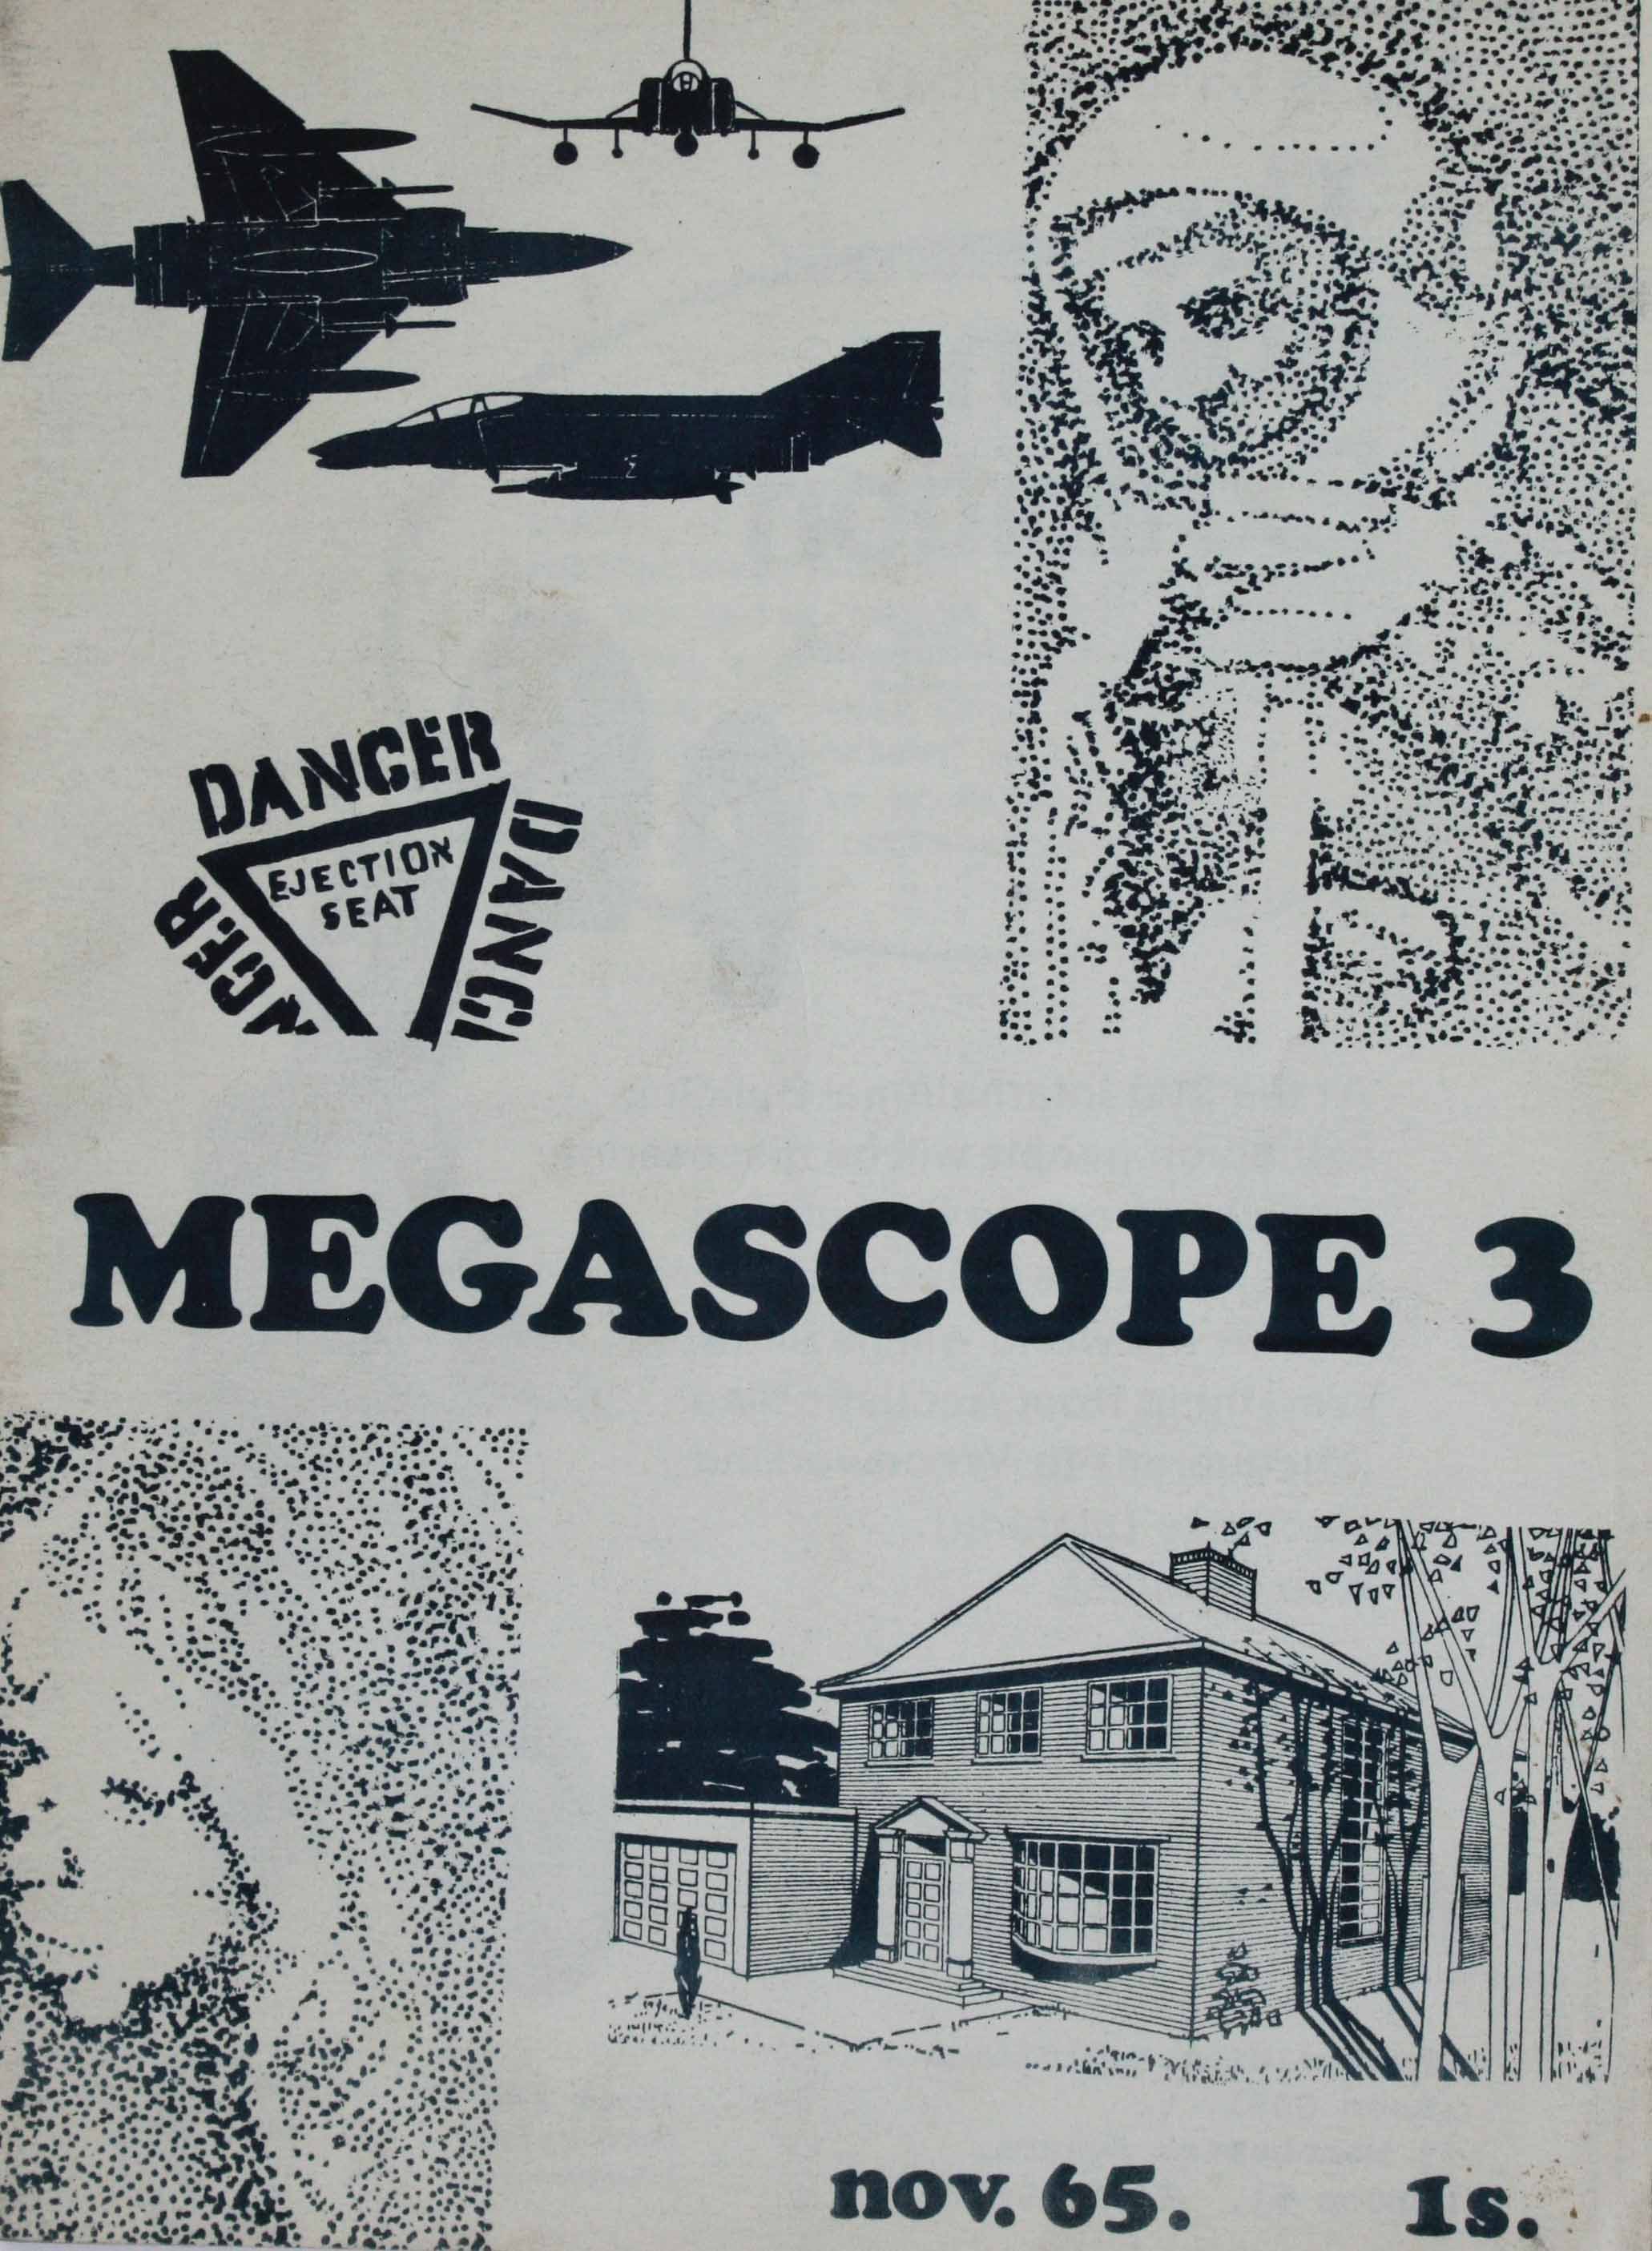 Cover Of Megascope 3, Published In 1965